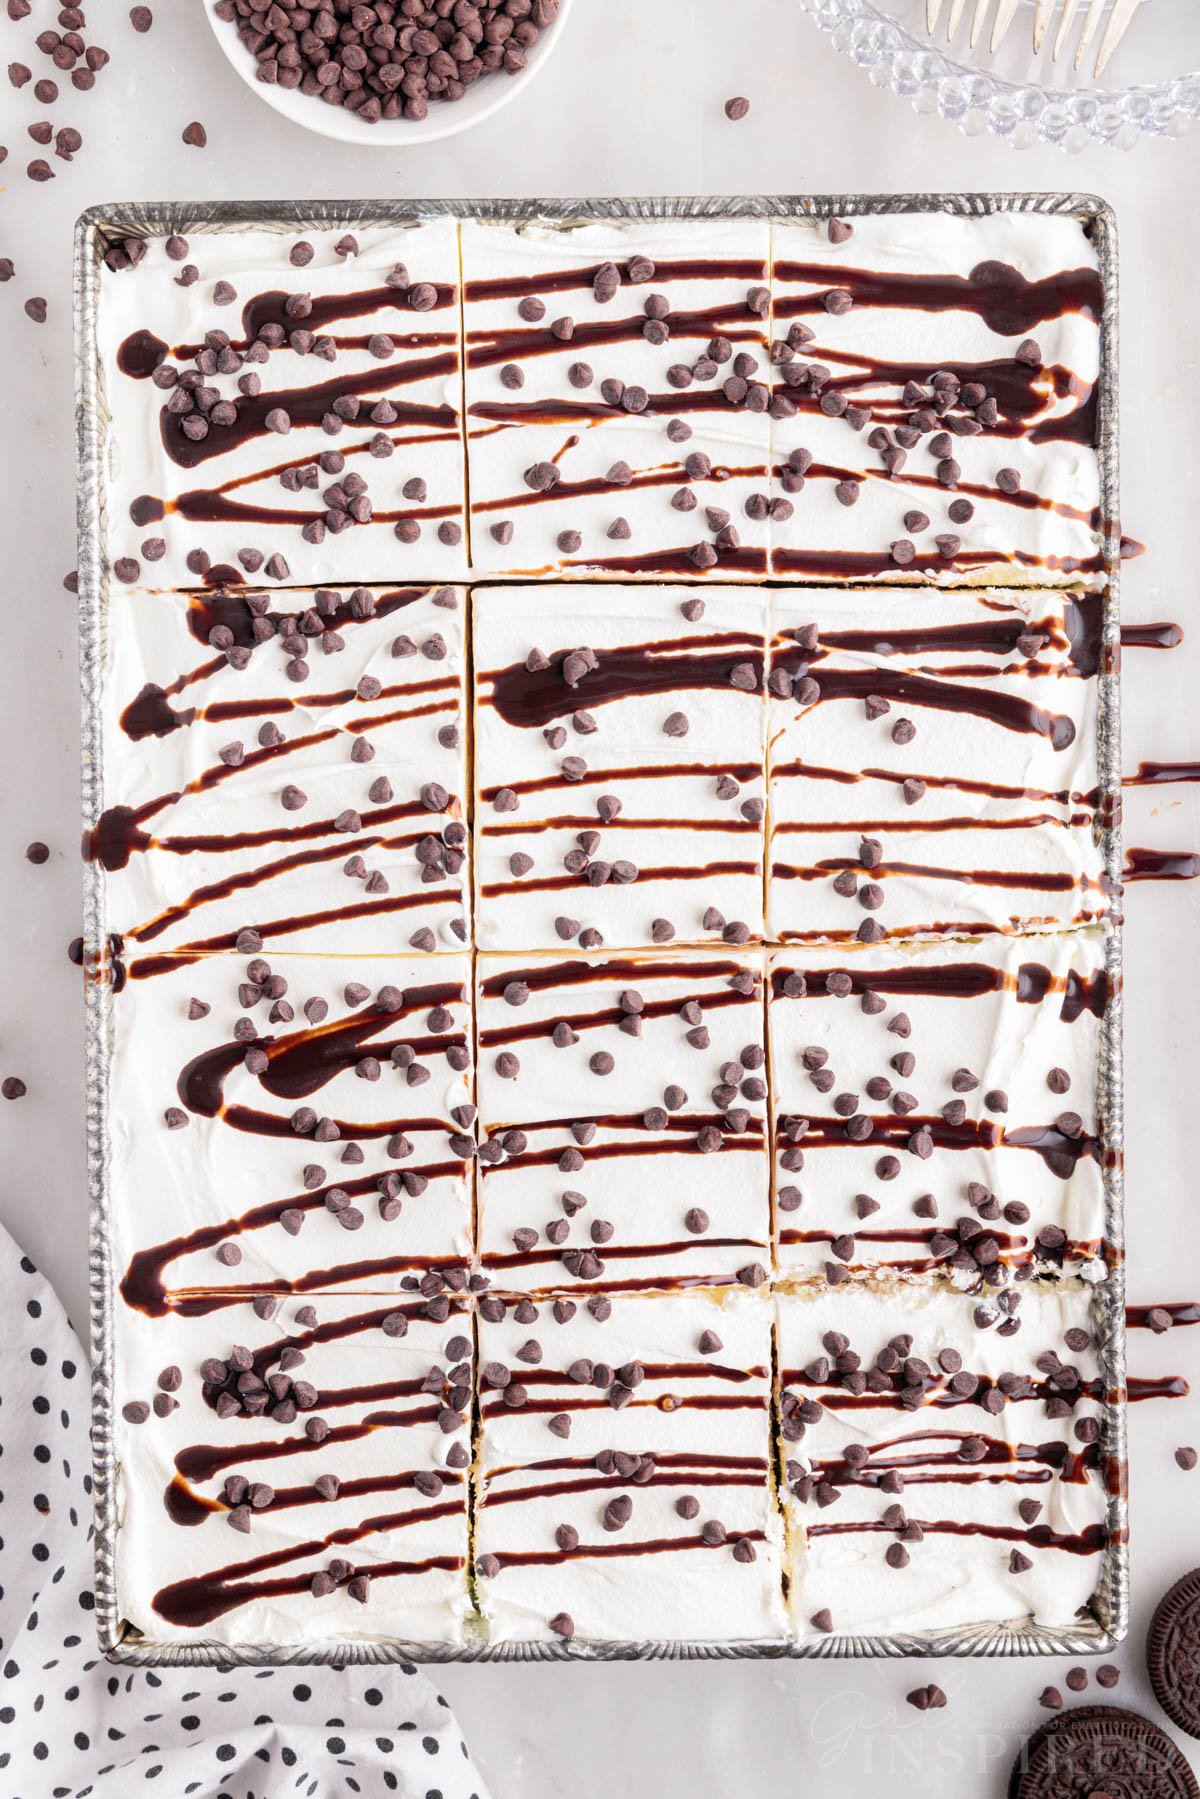 Mint chocolate chip ice cream cake cut into slices with hot fudge drizzle and mini chocolate chips in 9x13 pan.